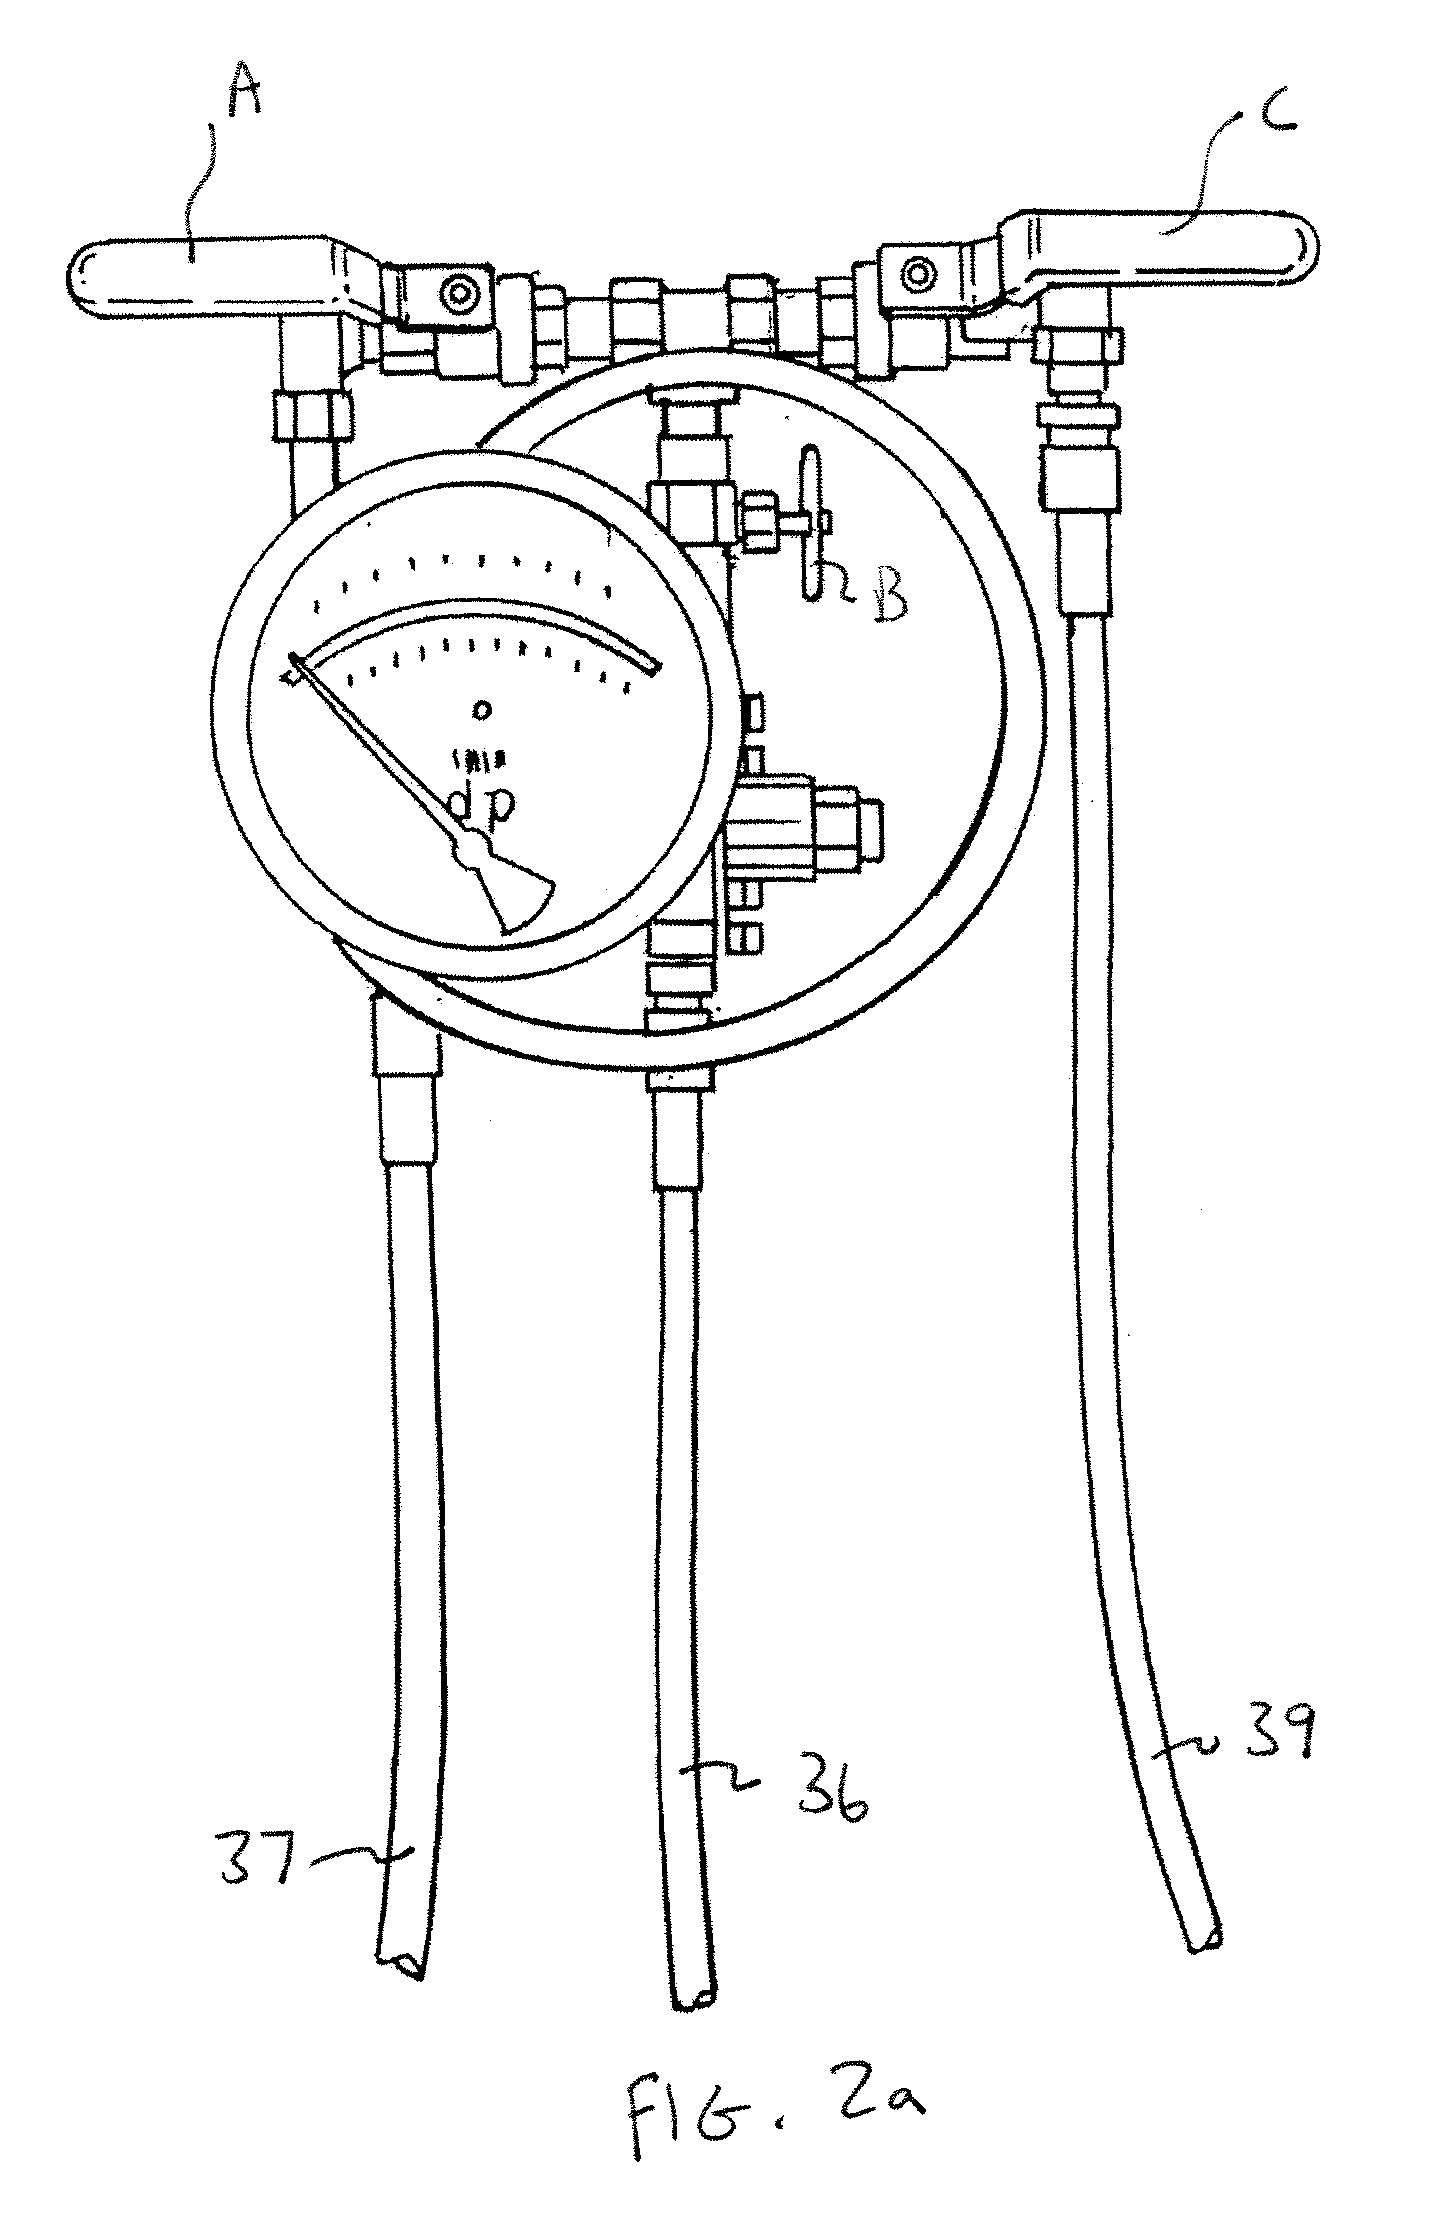 Method and Apparatus for a Gauge for Indicating a Pressure of a Fluid